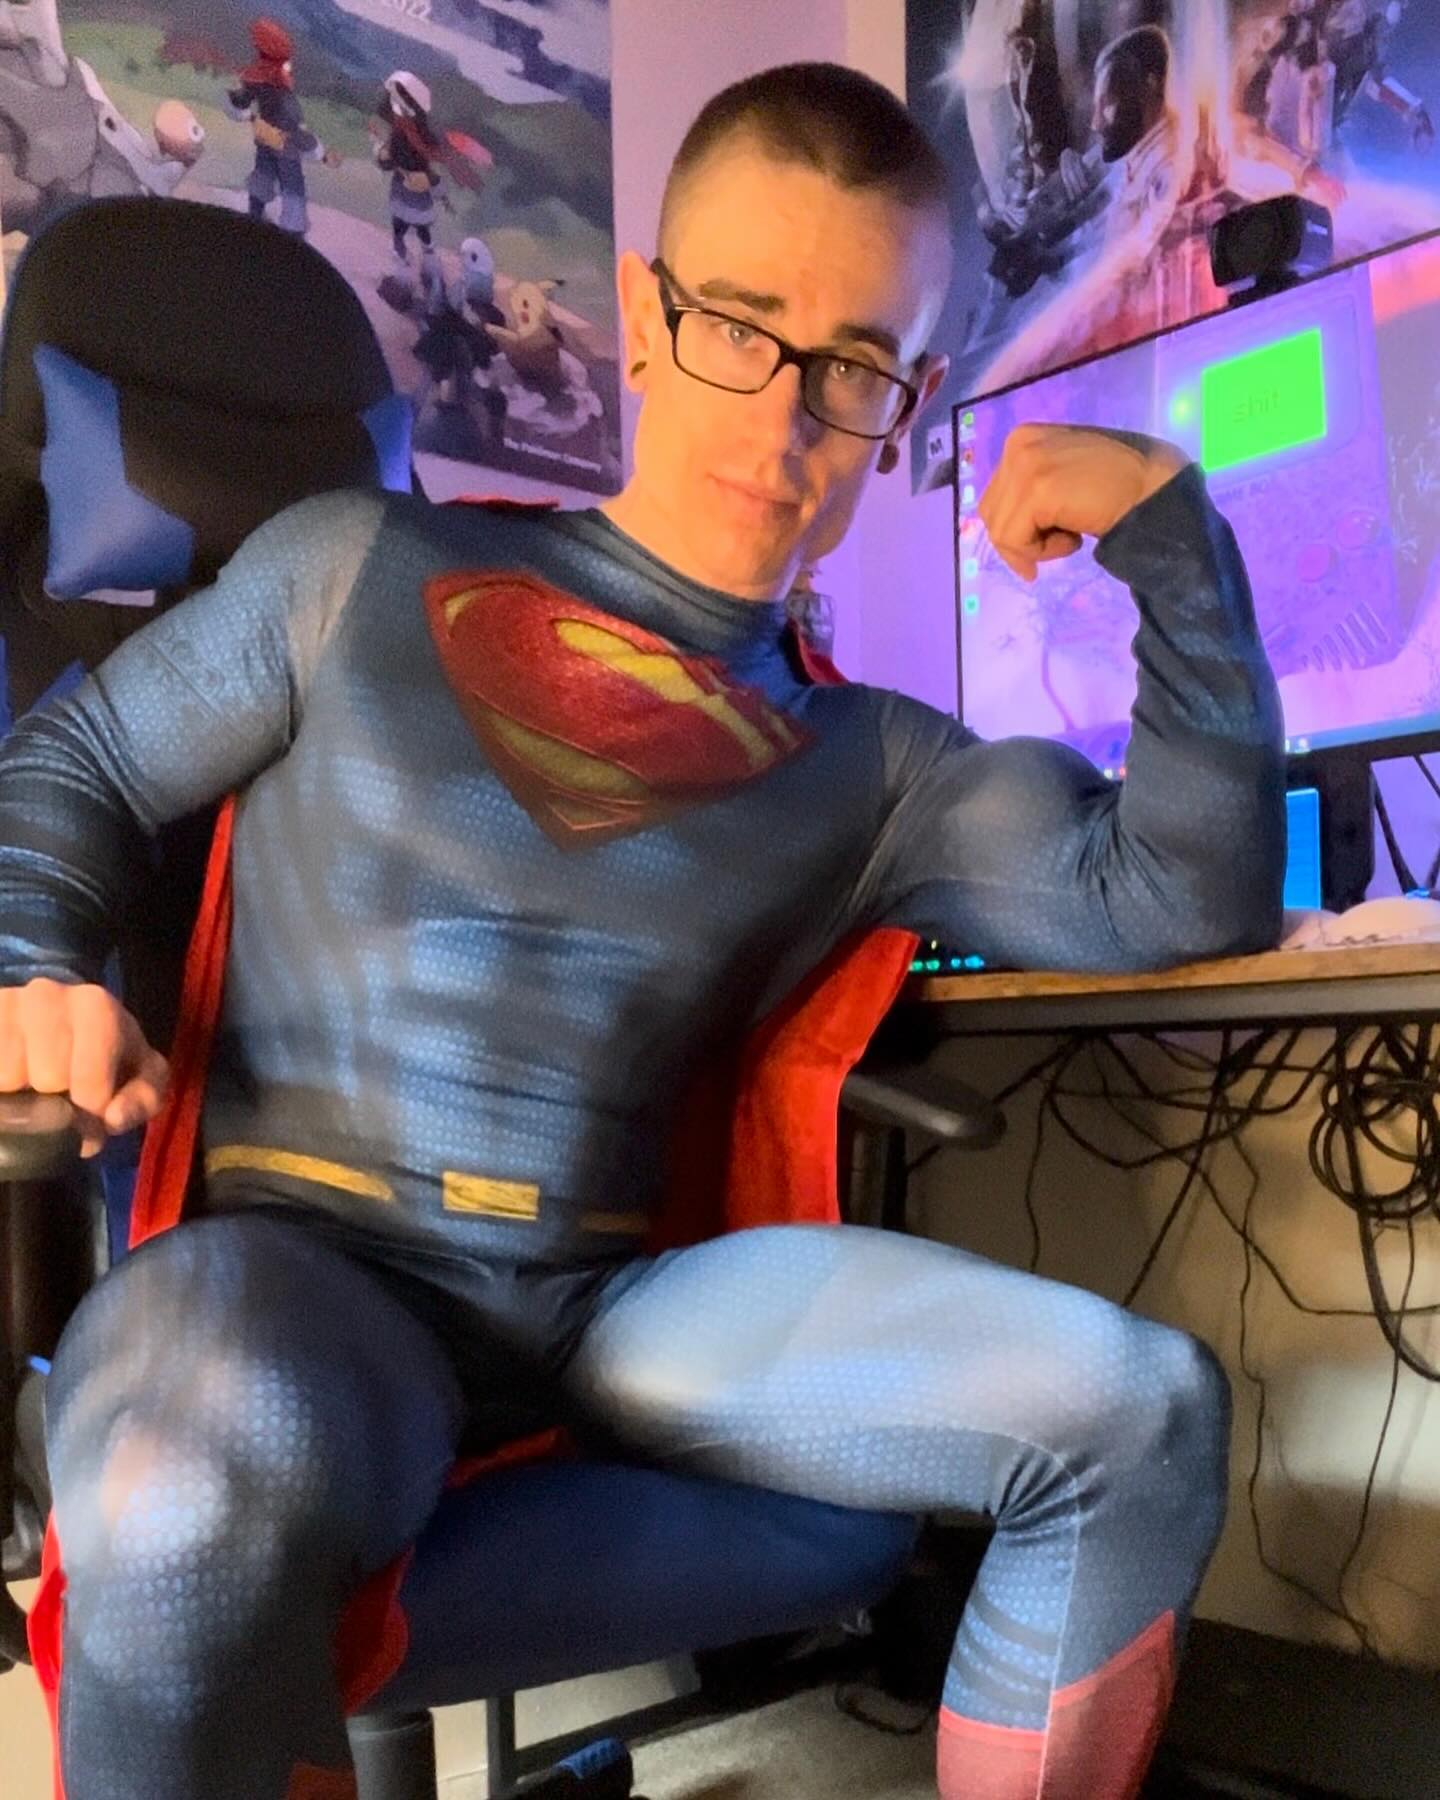 What do you mean you want to see if it’s really made of steel? 
.
.
.
.
.
.
#gaycosplay #cosplay #gay #gaycosplayer #cosplayer #cosplayersofinstagram #dccomics #marvel #gaygeek #malecosplay #lgbtq #spiderman #instagay #crossplay #malecosplayer #cosplaying #cosplaygay #gaynerd #menwhocosplay #dccosplay #gaymer #gayman #lgbt #spidermancosplay #cosplayphotography #teentitans #thriftstorefinds #cosplayboy #gayart #yaoi